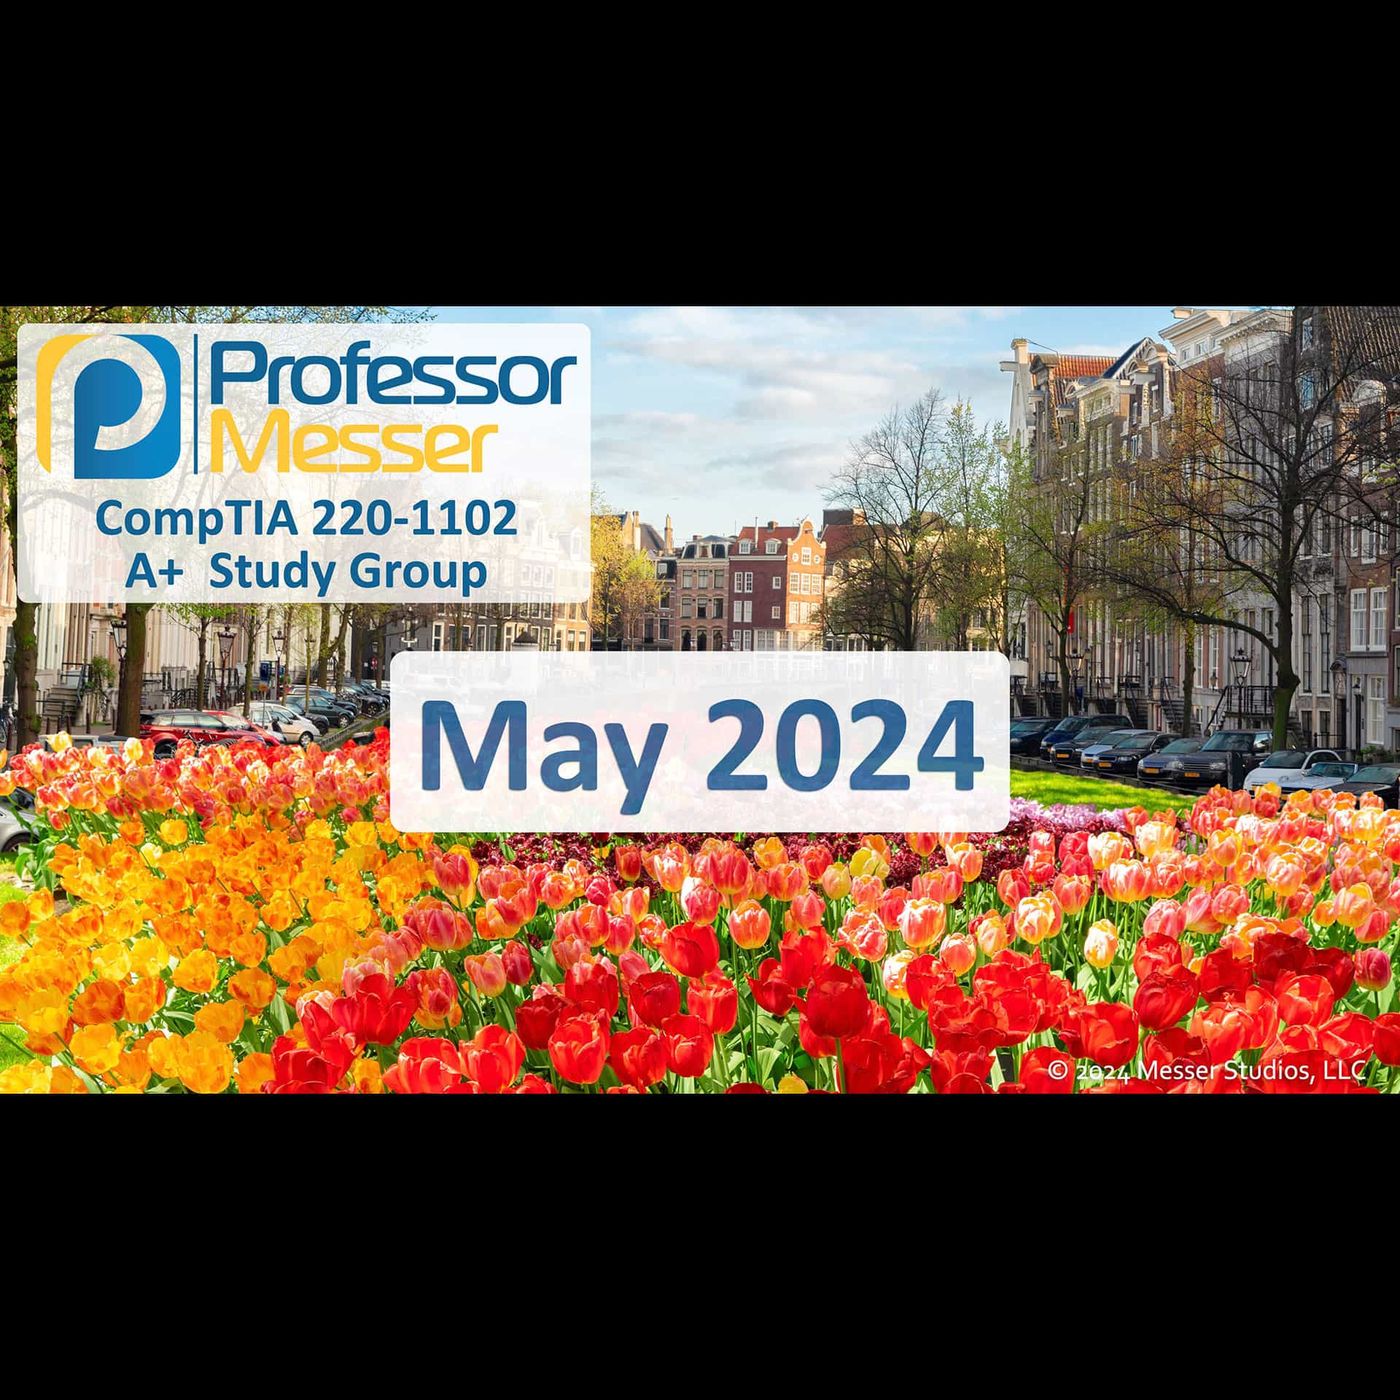 Professor Messer’s CompTIA 220-1102 A+ Study Group After Show - May 2024